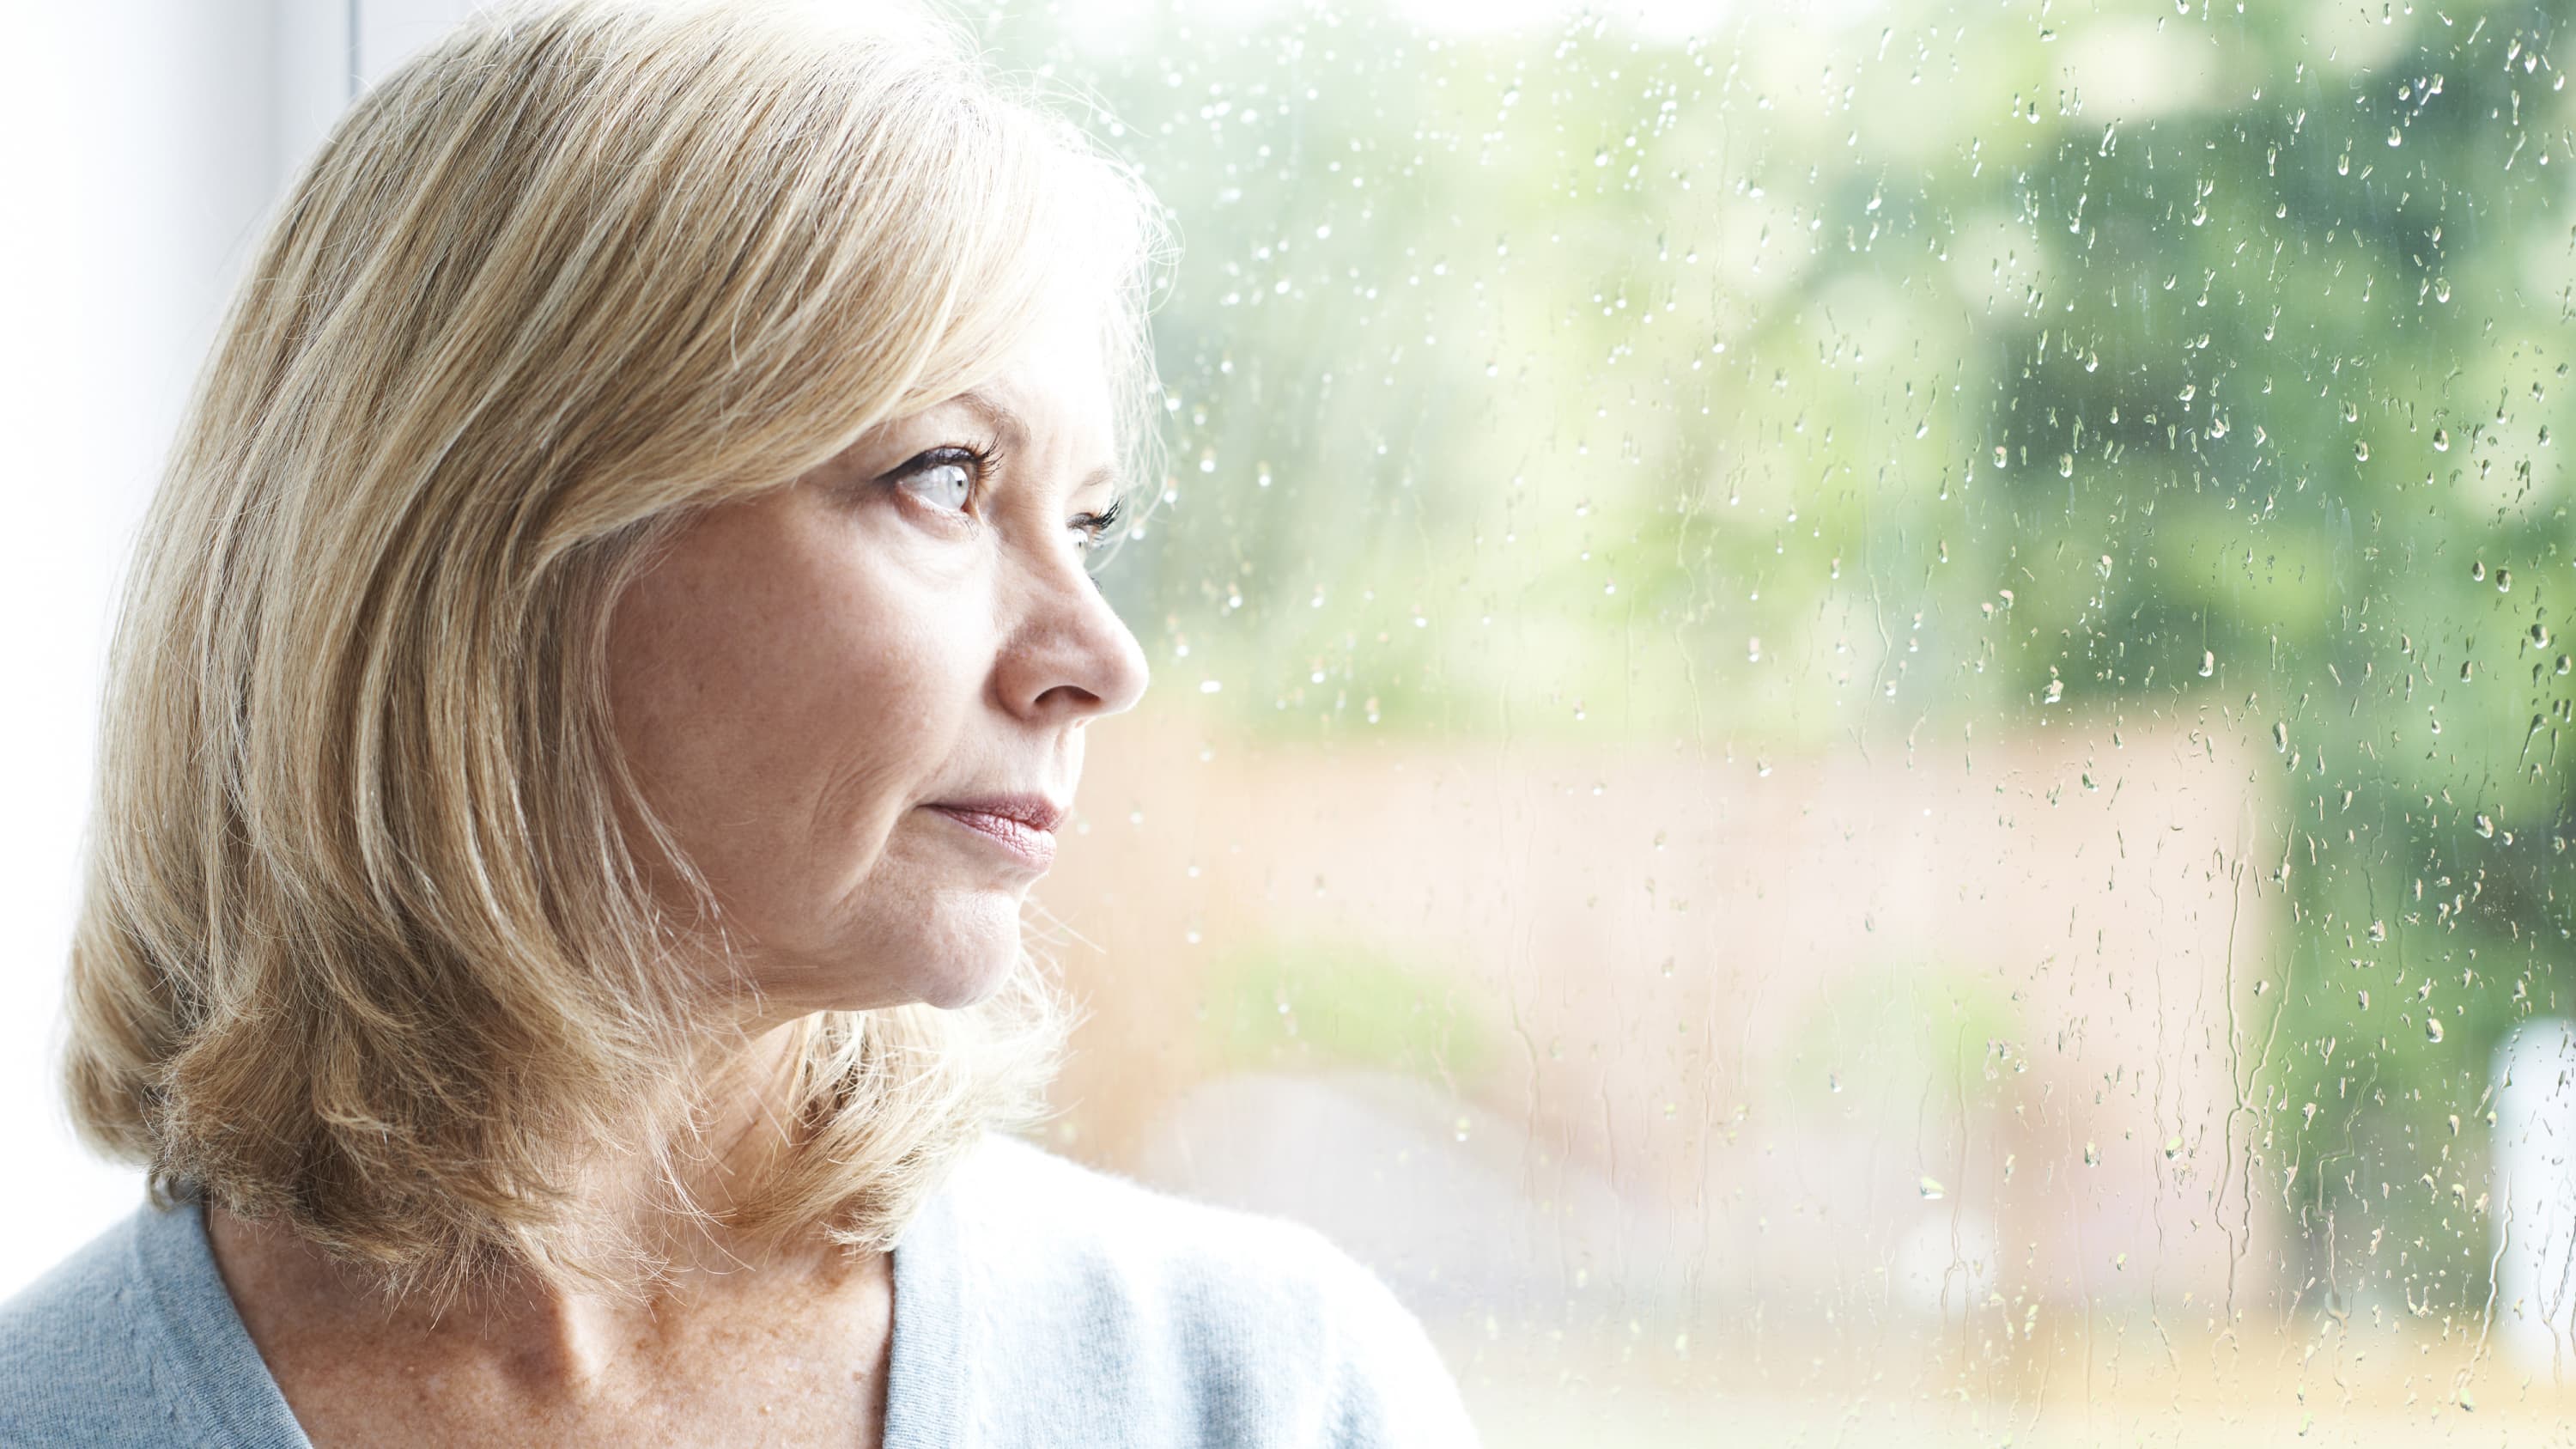 Mature woman who has Wilson disease gazing out a window.